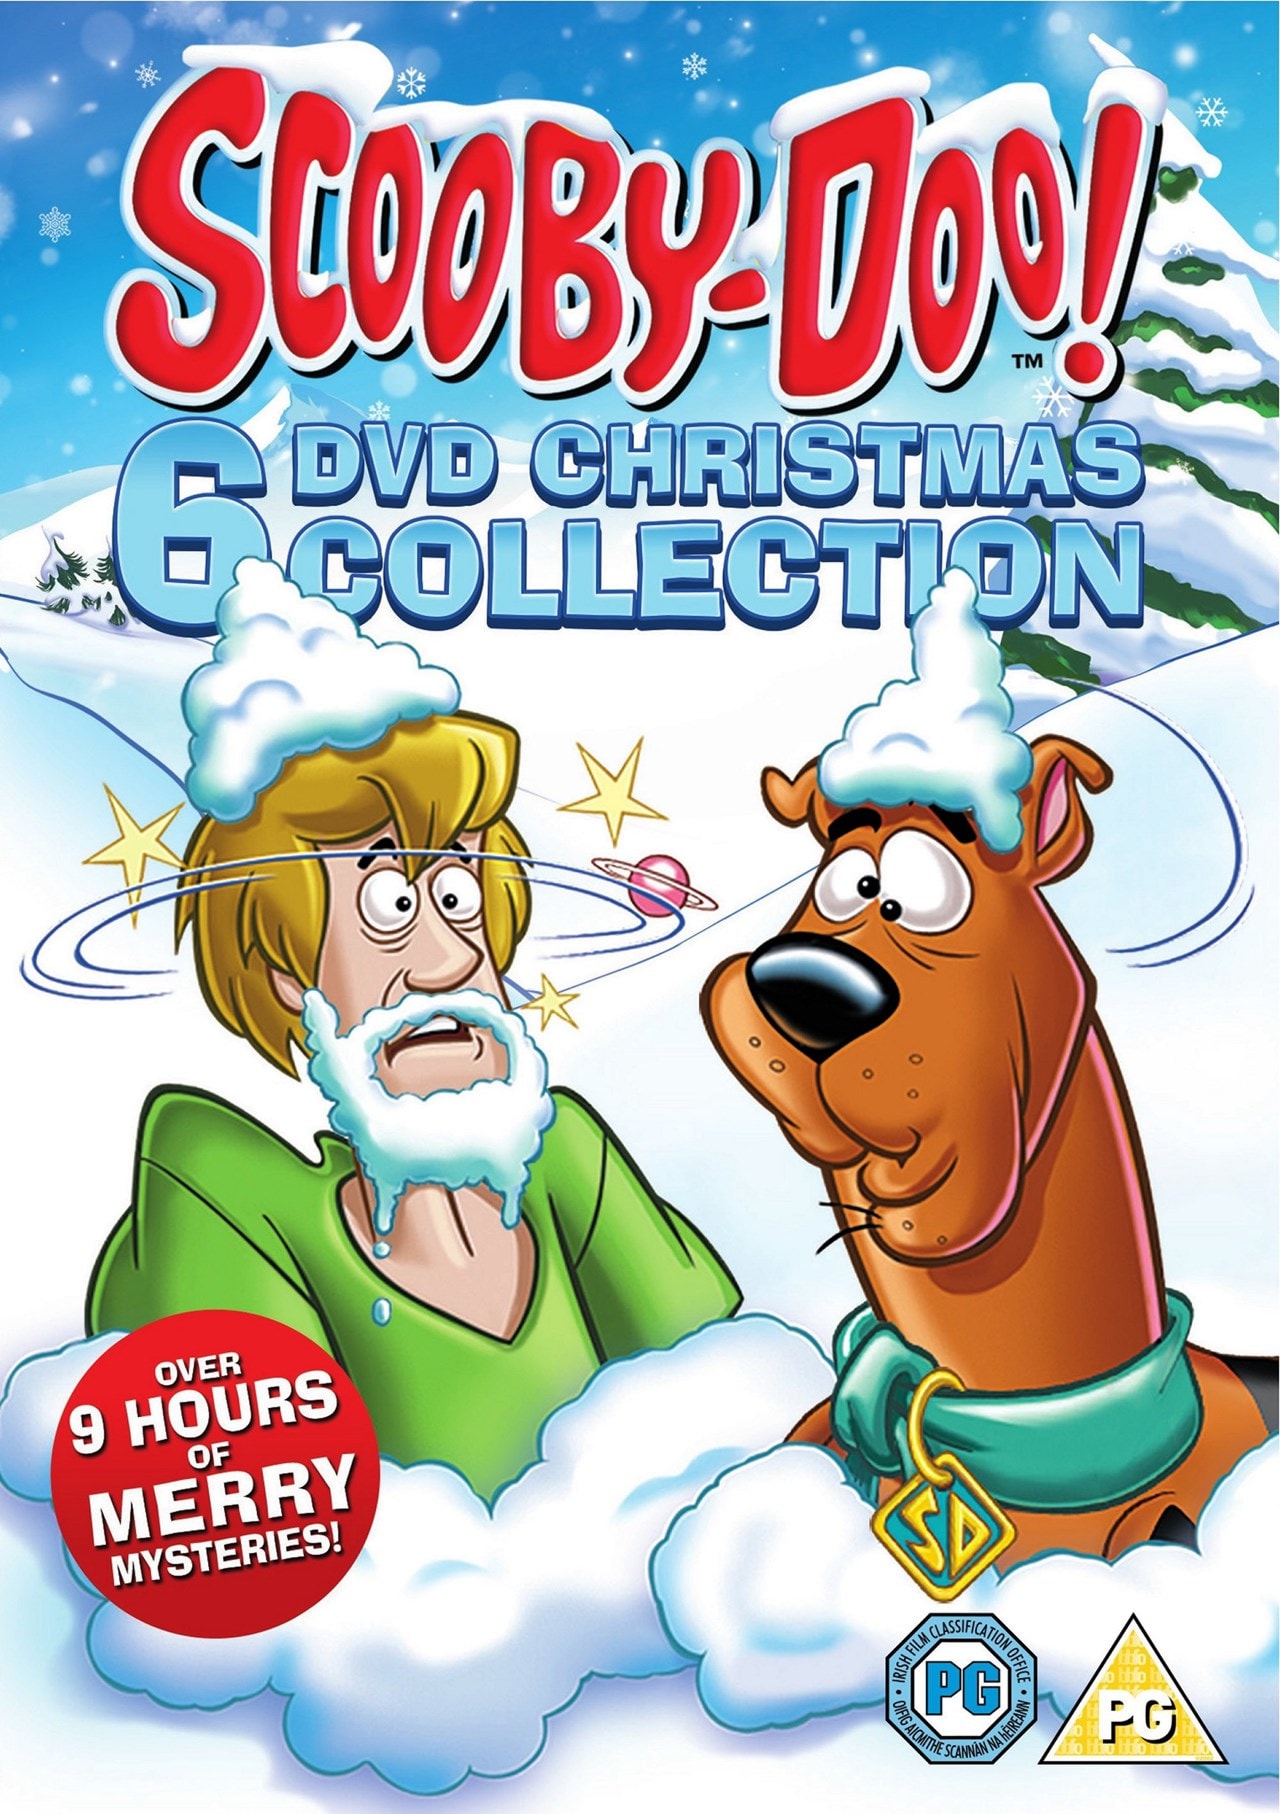 Scooby-Doo: Christmas Collection | DVD | Free shipping ...